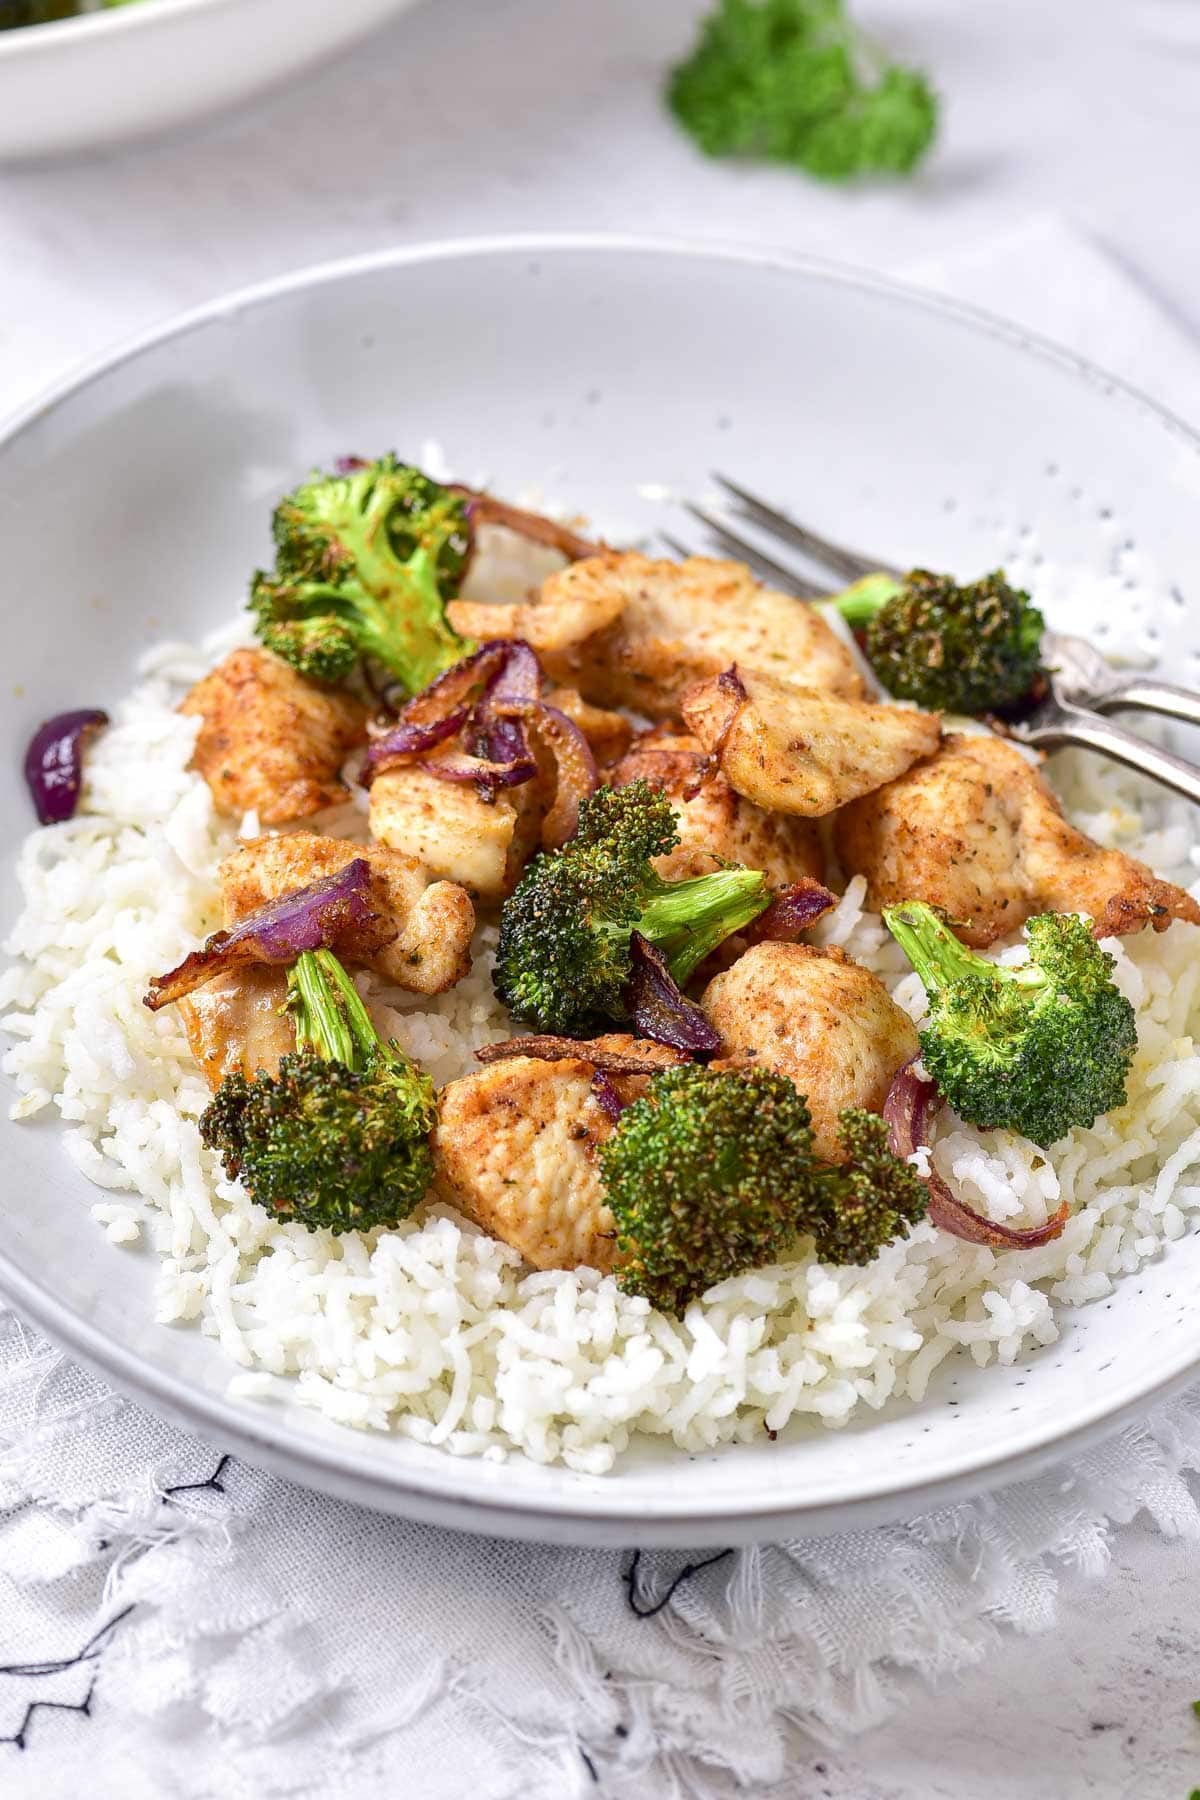 cooked chicken and broccoli on rice on white plate with fork behind.